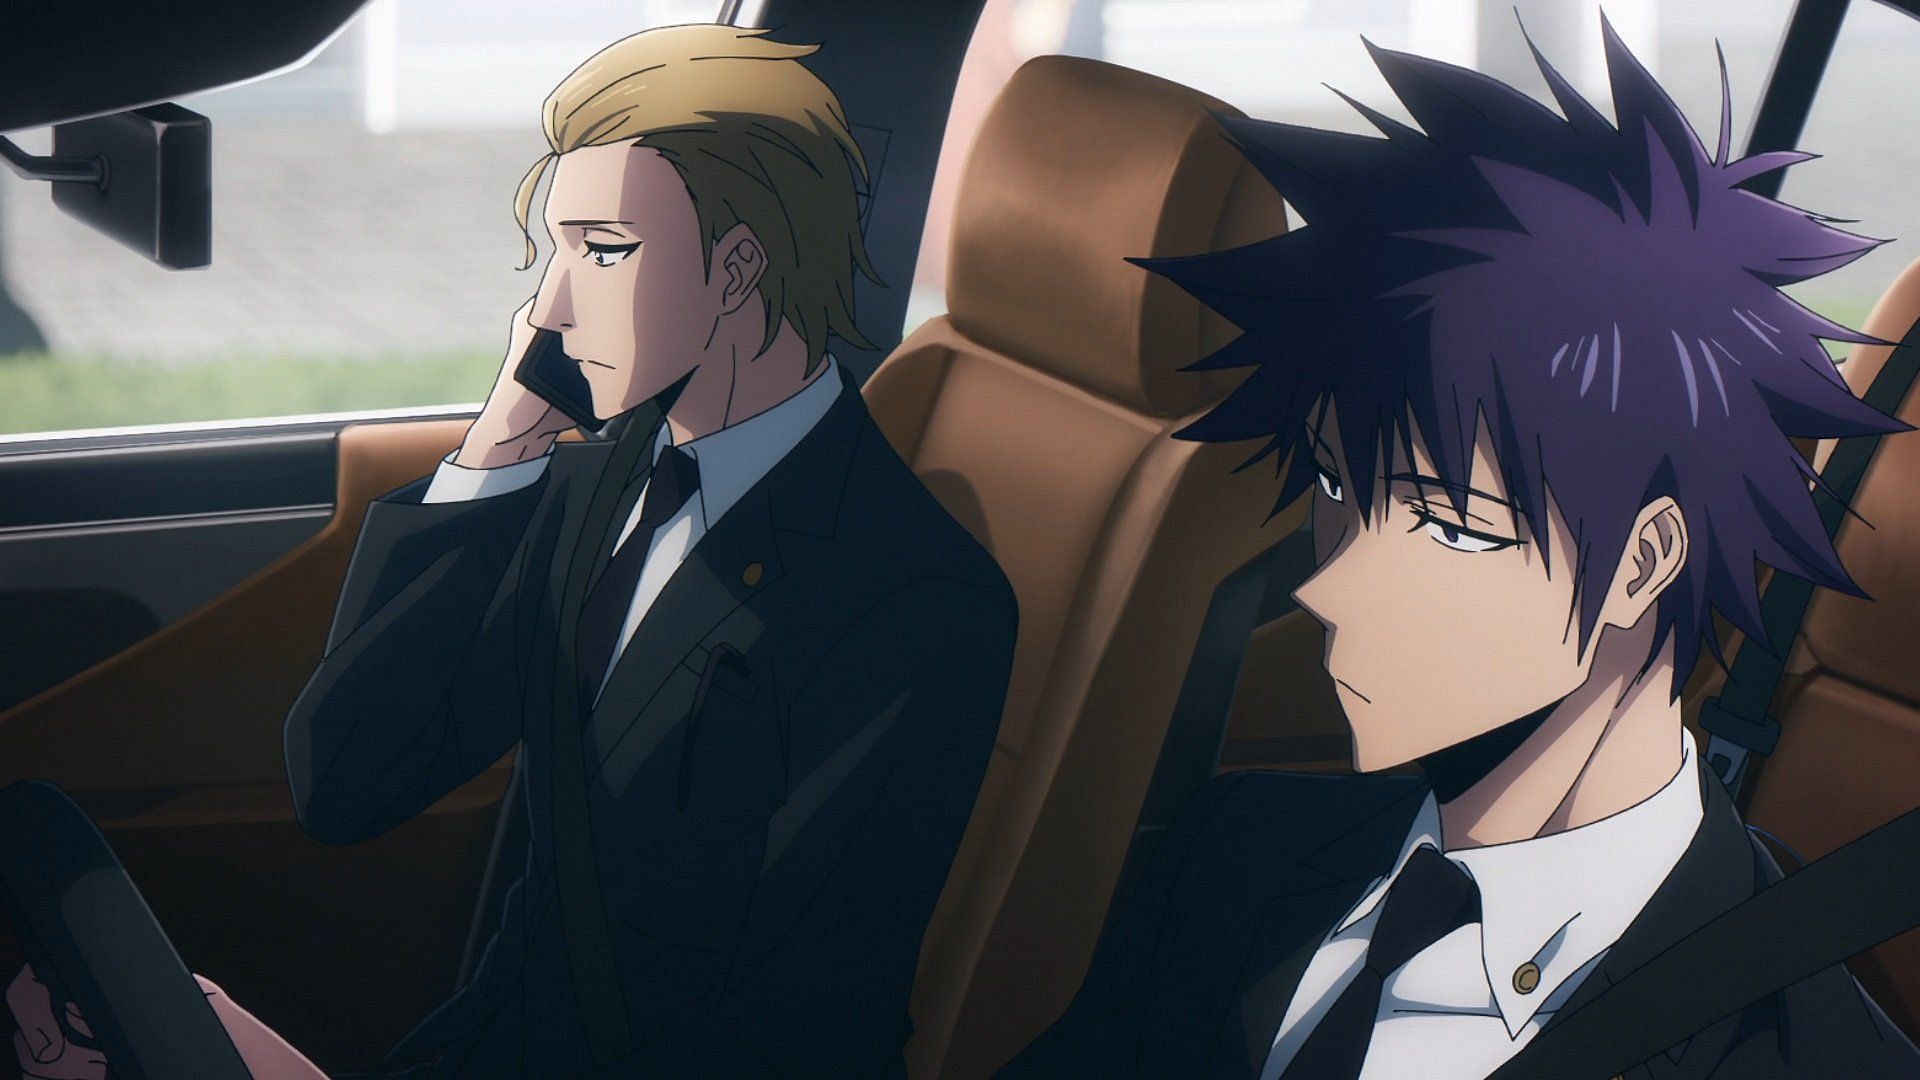 Woo Jinchul and Kang Taeshik in Solo Leveling (Image via A-1 Pictures)